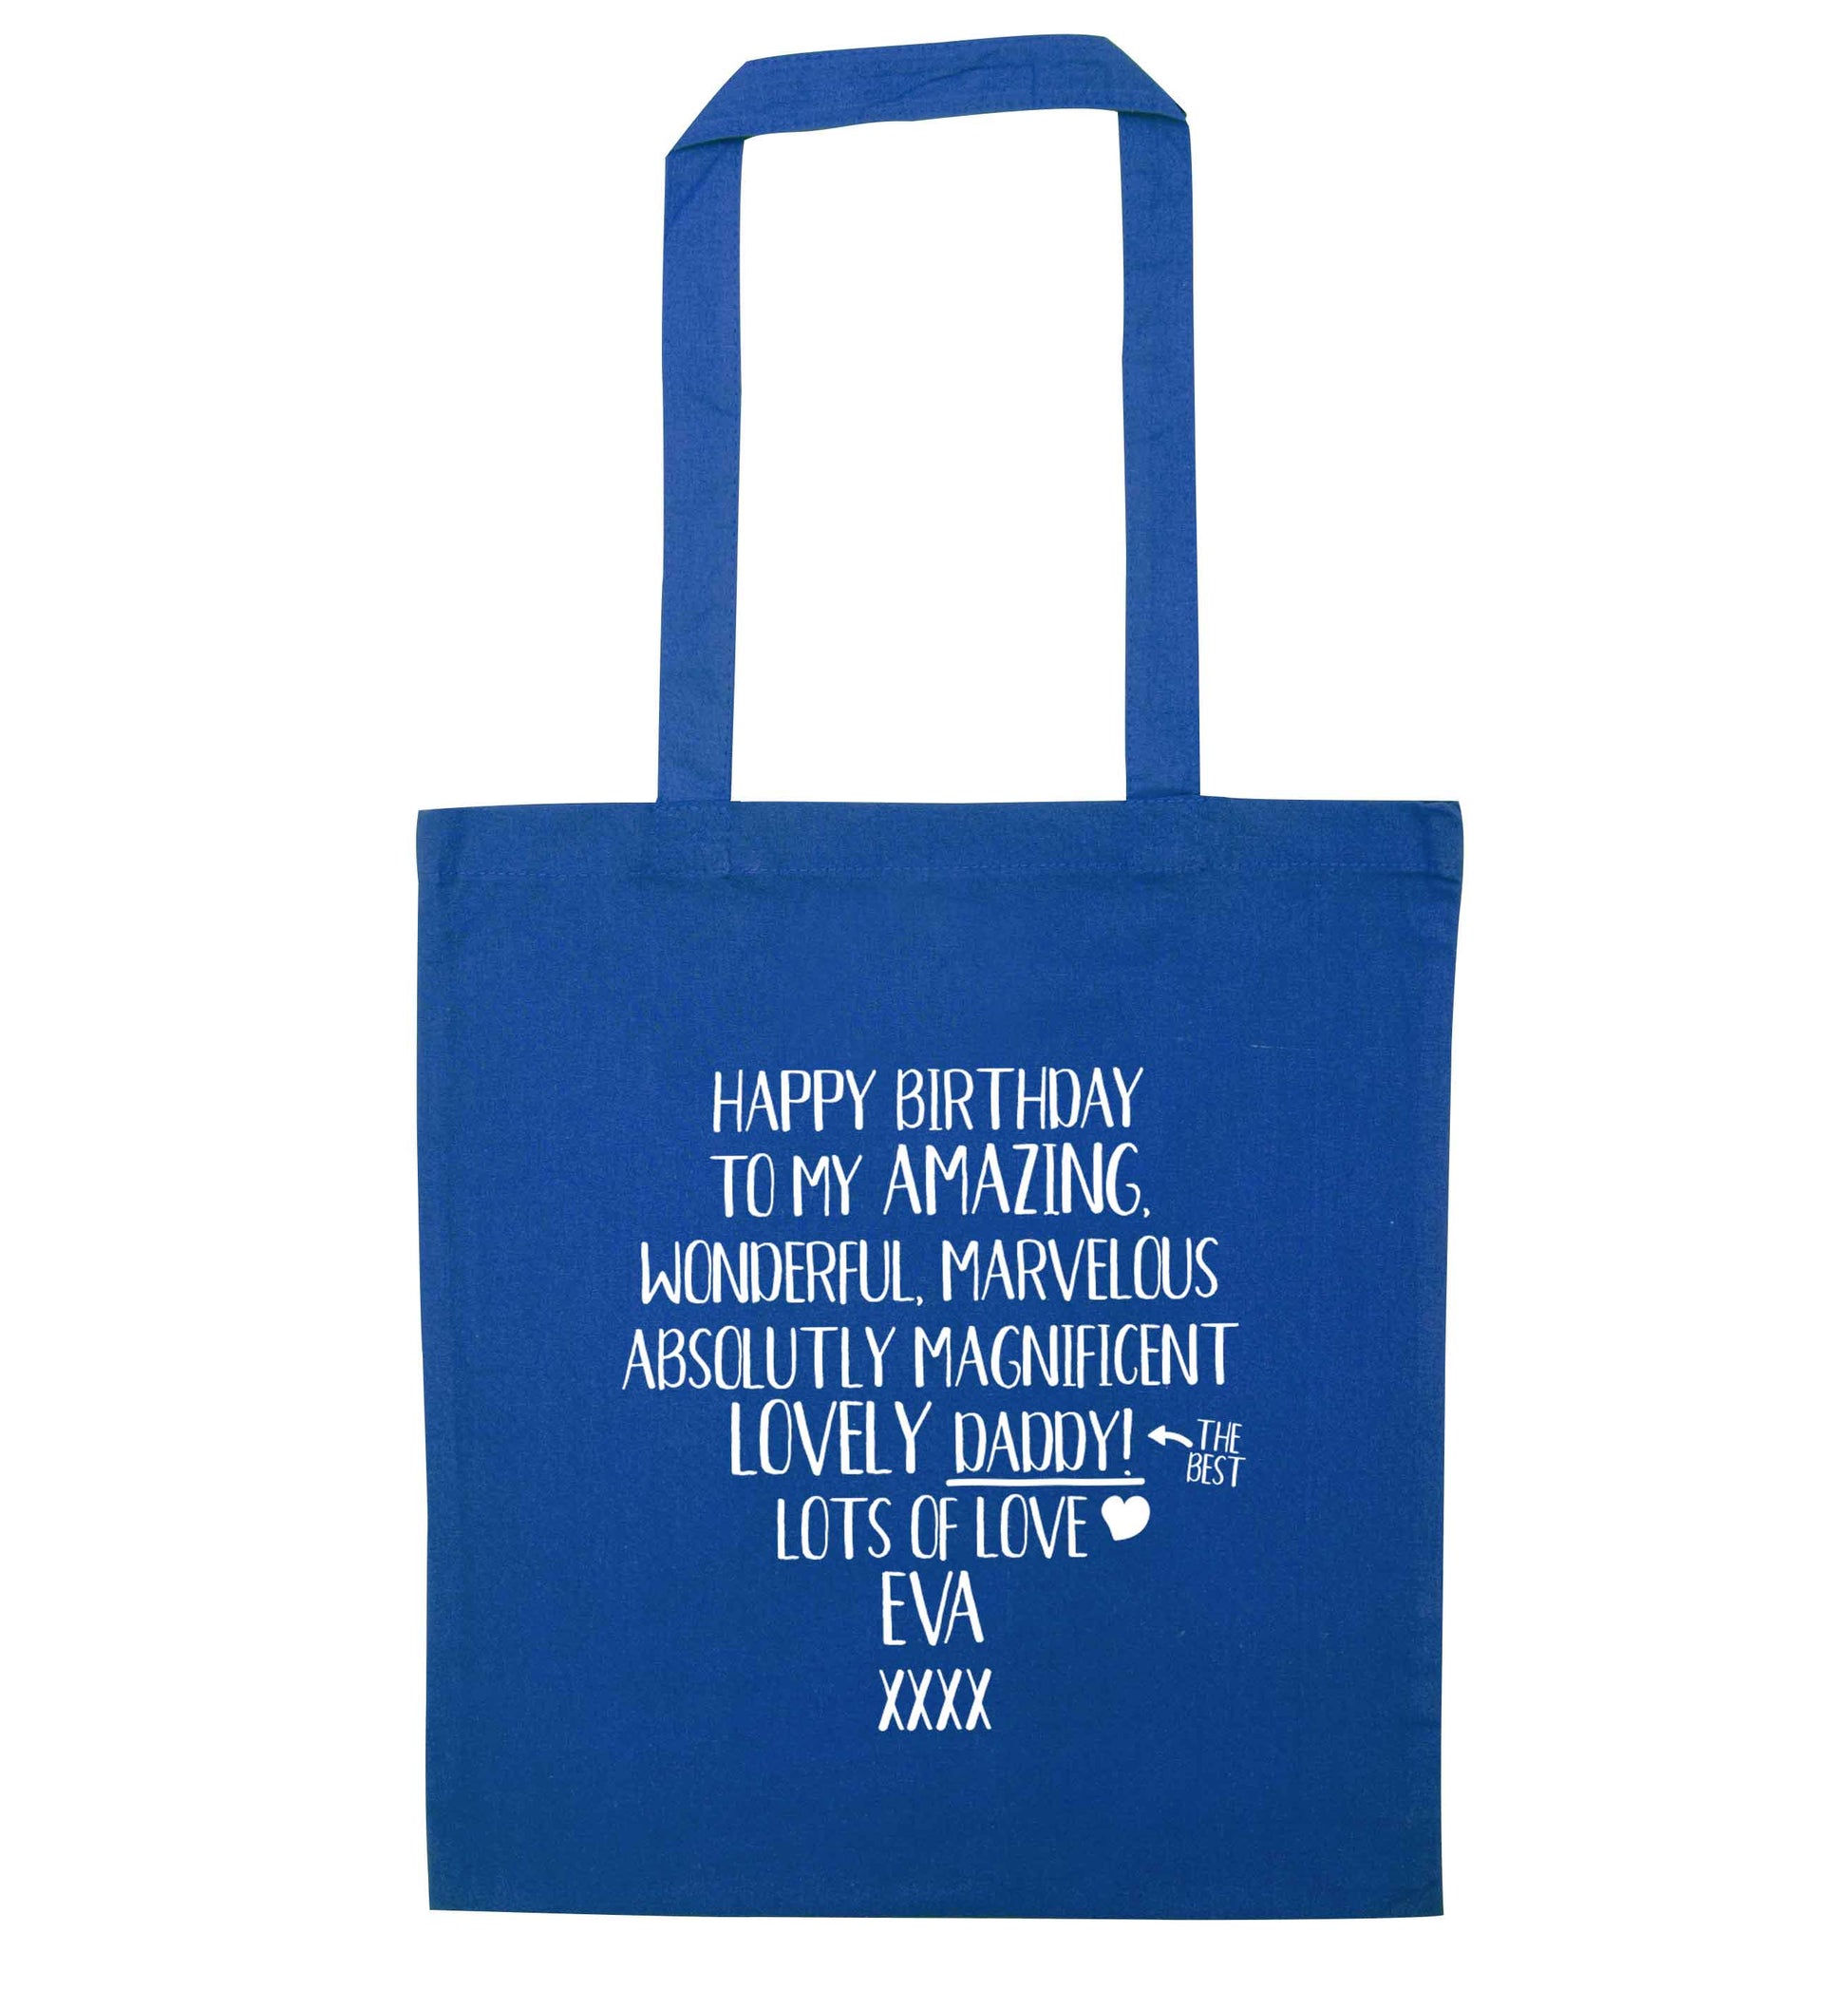 Personalised happy birthday to my amazing, wonderful, lovely daddy blue tote bag